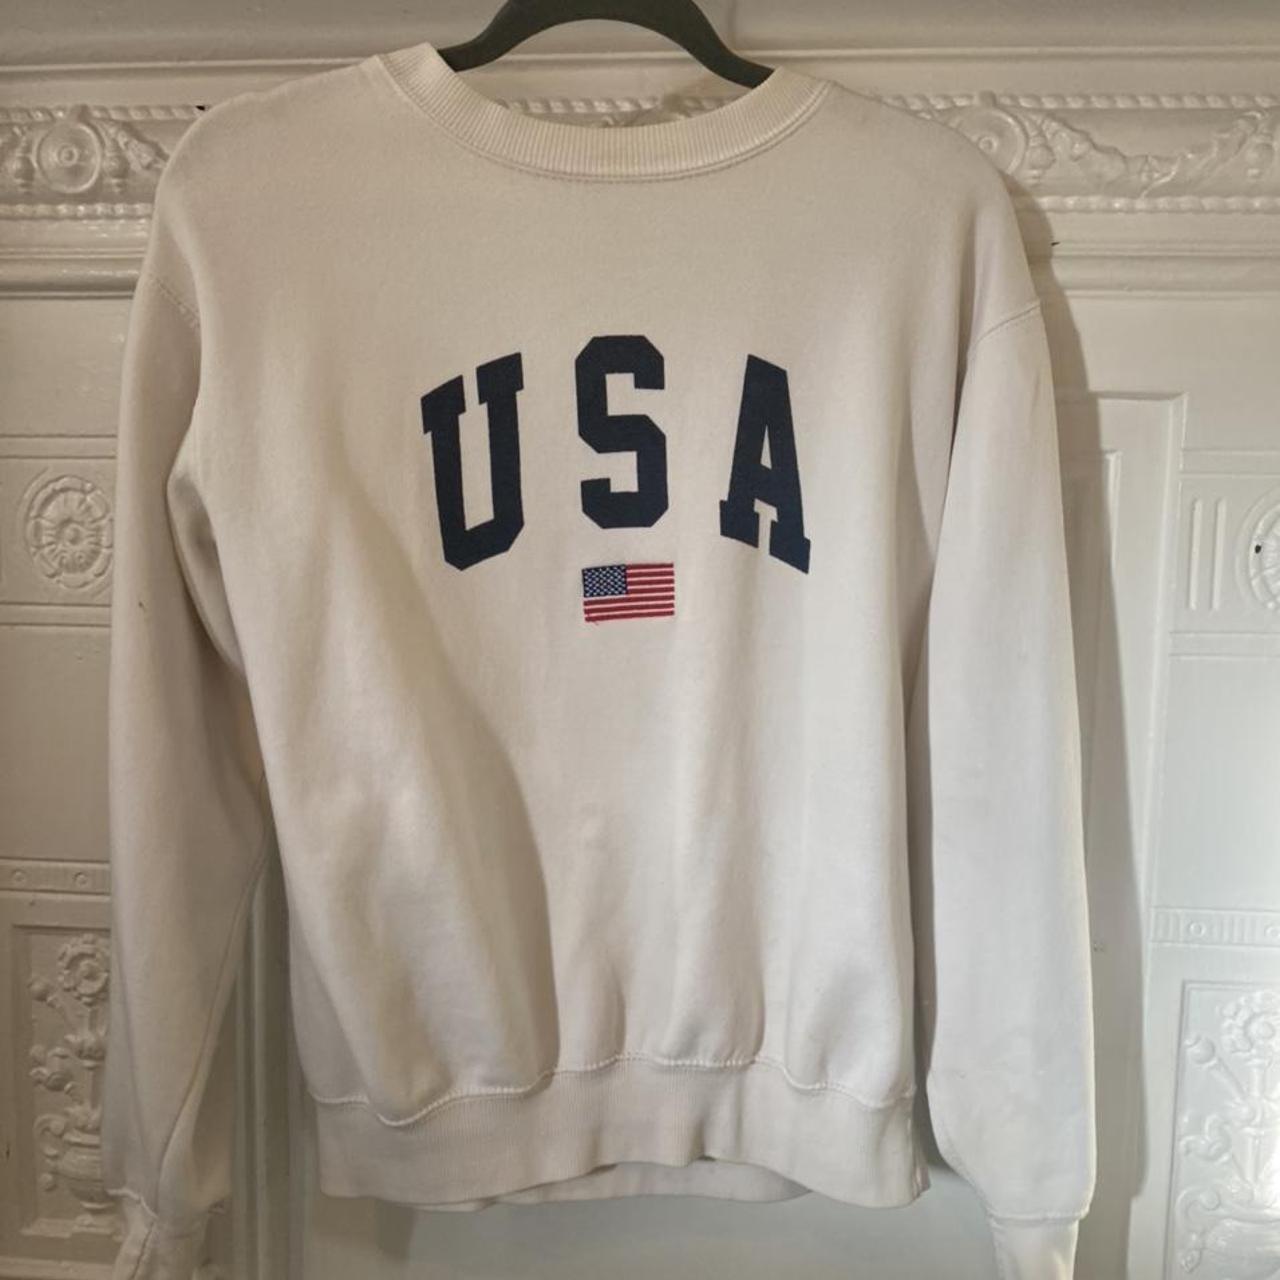 Amazing Brandy Melville USA 🇺🇸 jumper. So comfy and a... Depop